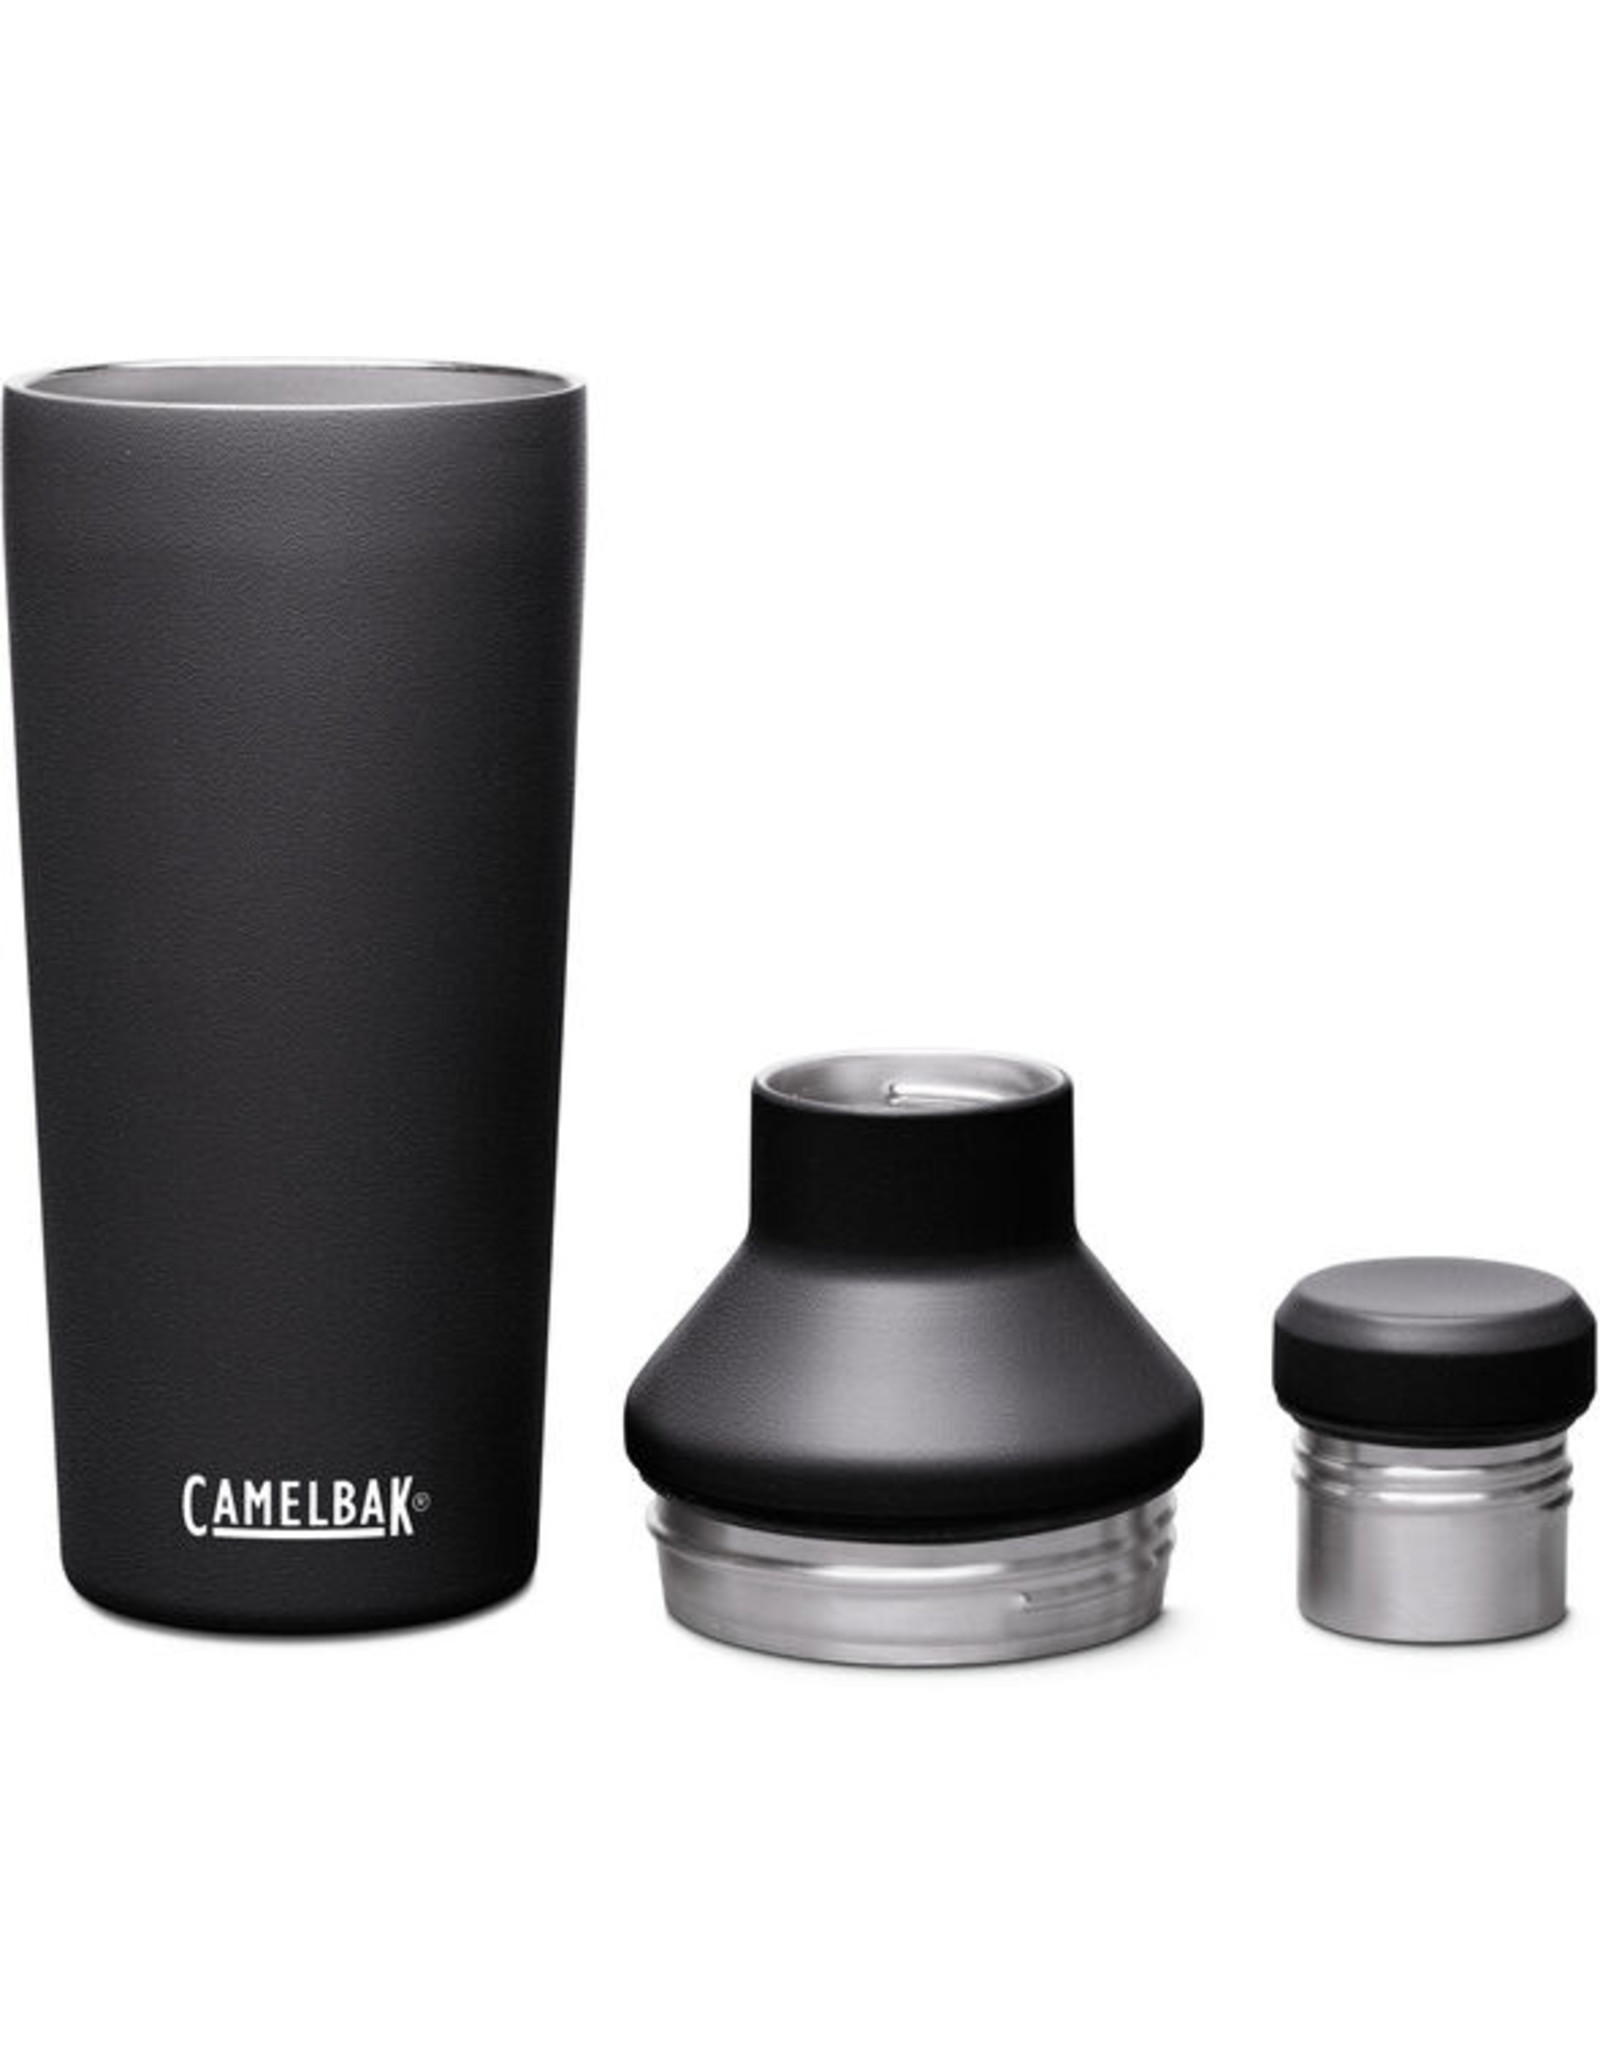 Pathfinder Insulated Cocktail Shaker 50th, 20oz